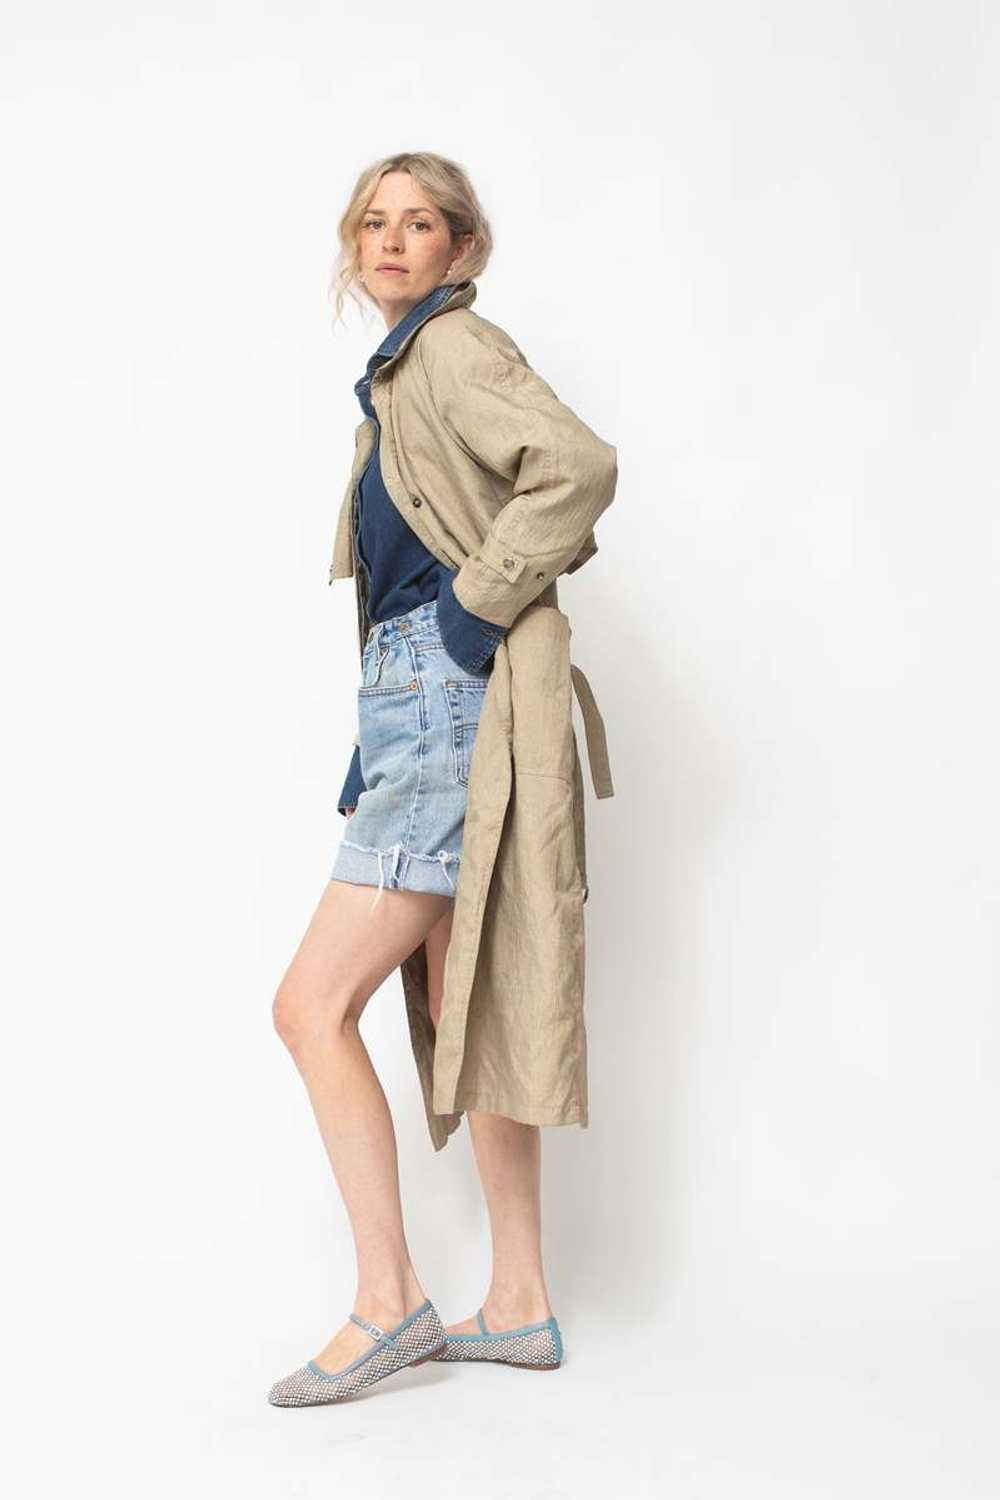 VINTAGE Lightweight Trench - Tan - image 2